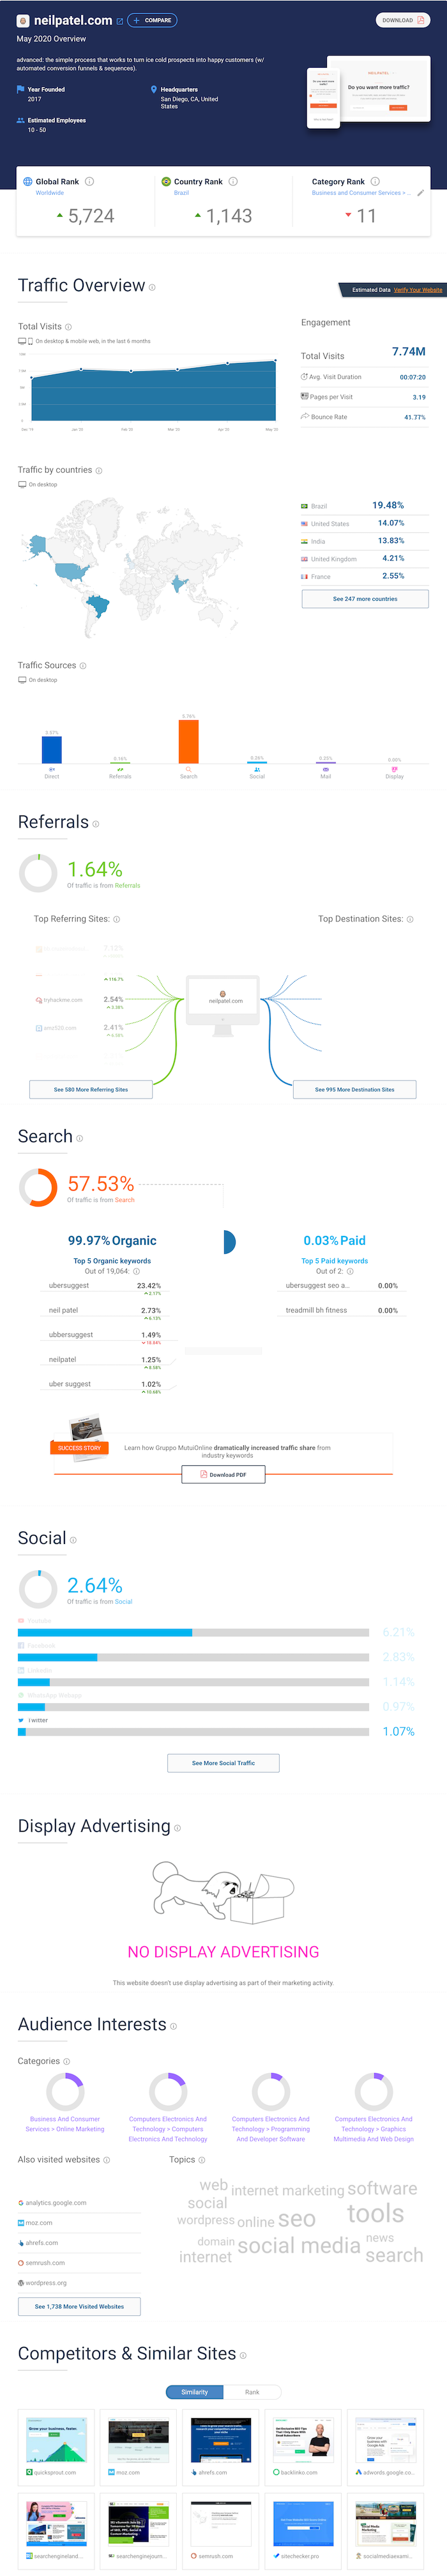 similarweb example for 4 ps of marketing guide